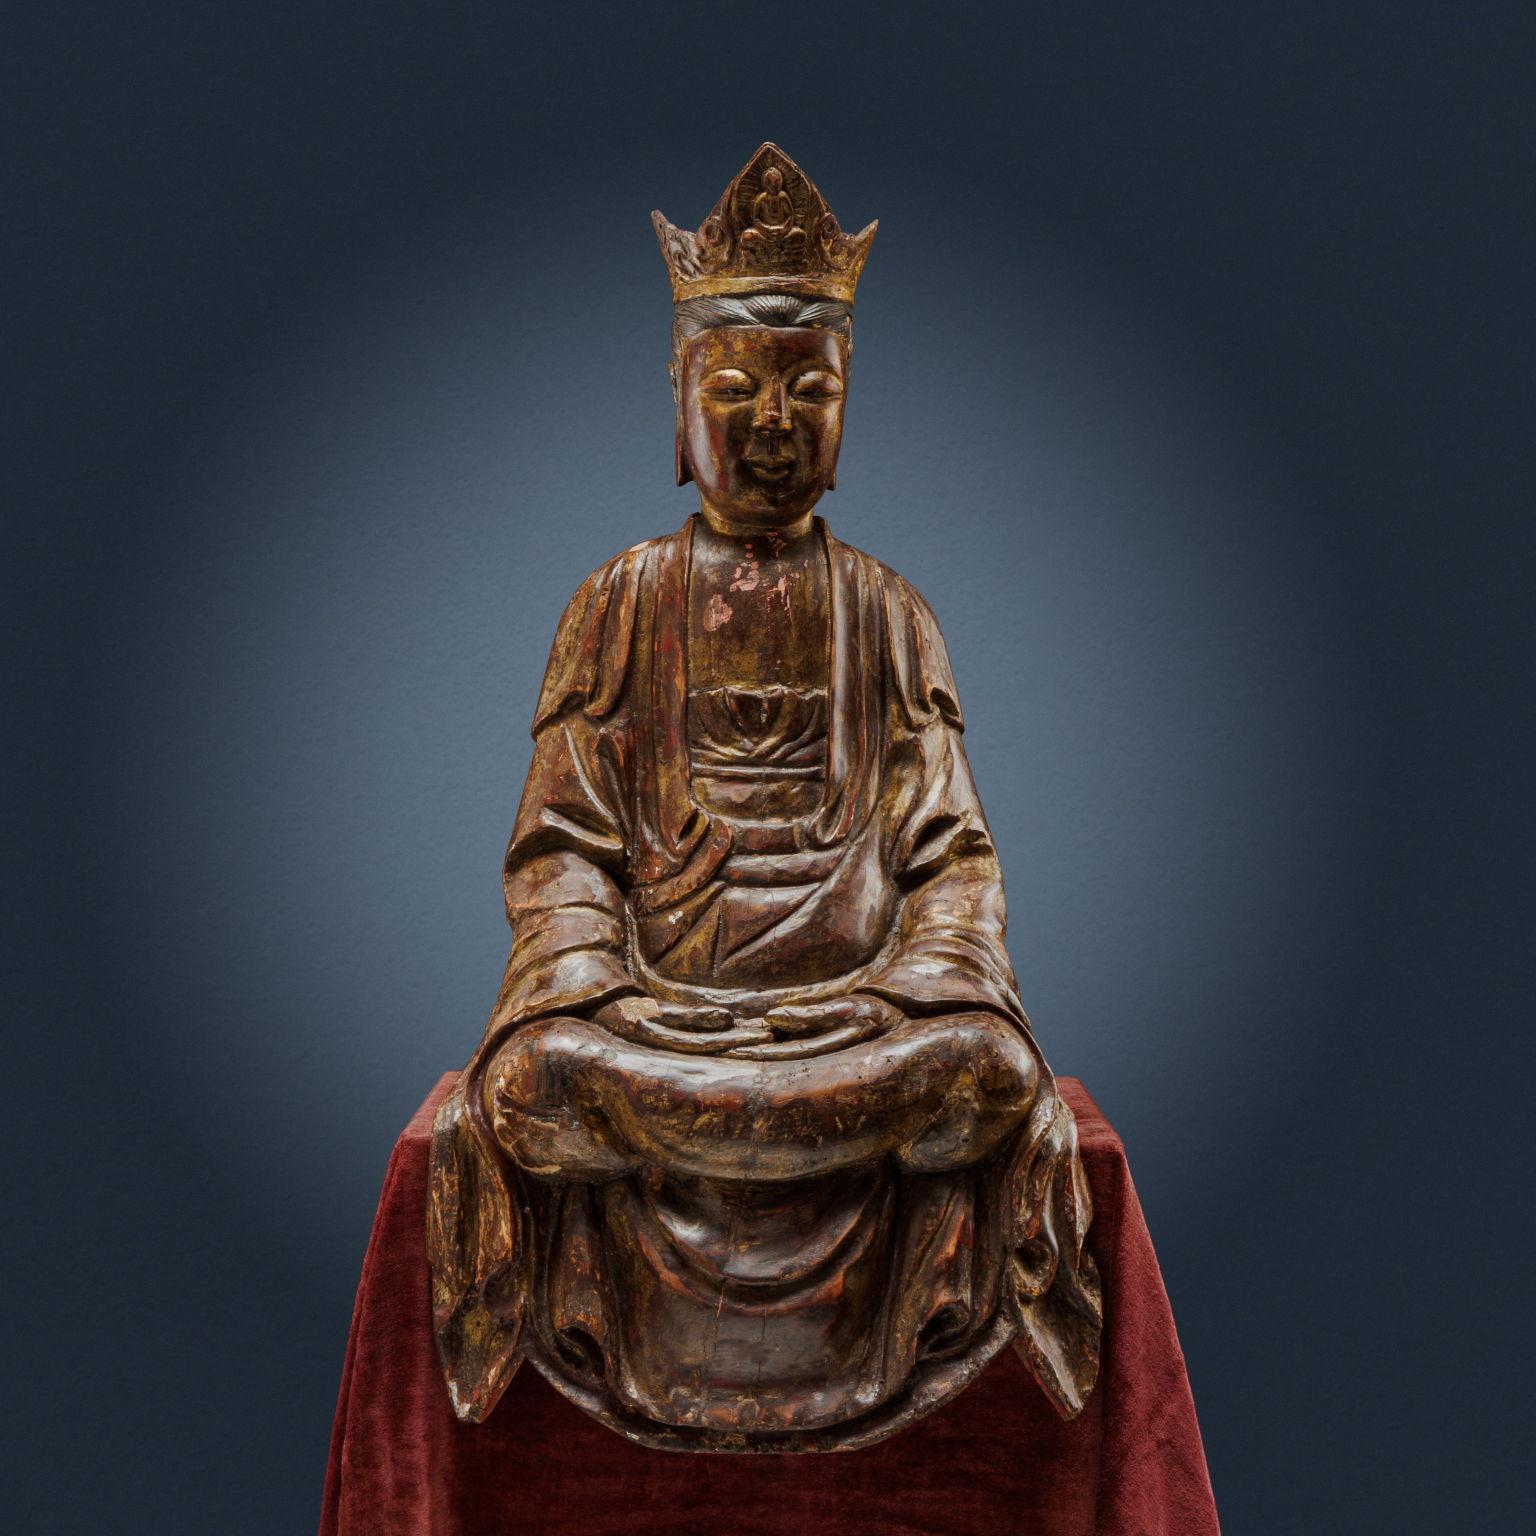 Sculpture in carved and lacquered wood with traces of gilding. Guanyin represented with crossed ankles and hands in the dhyana mudra position. Her face is shown with a serene expression, surmounted by a crown representing a Buddha. An elegant